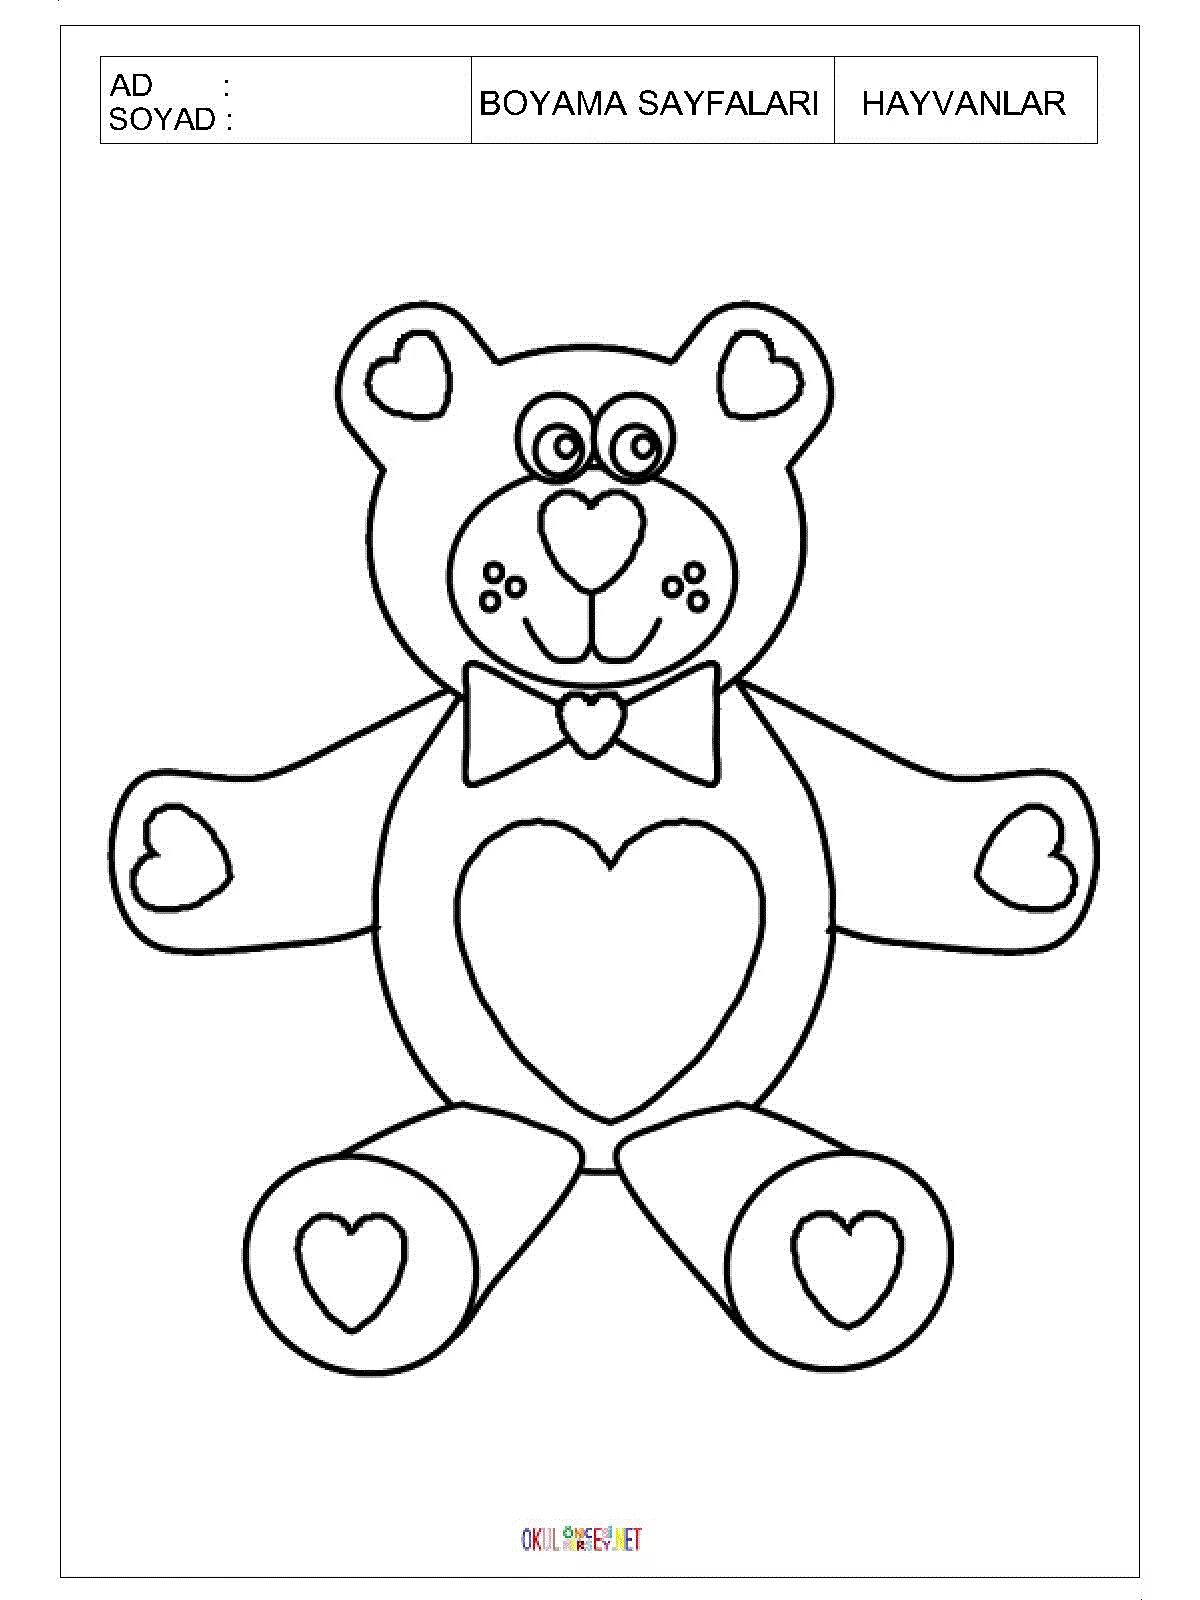 Coloring book witty teddy bear